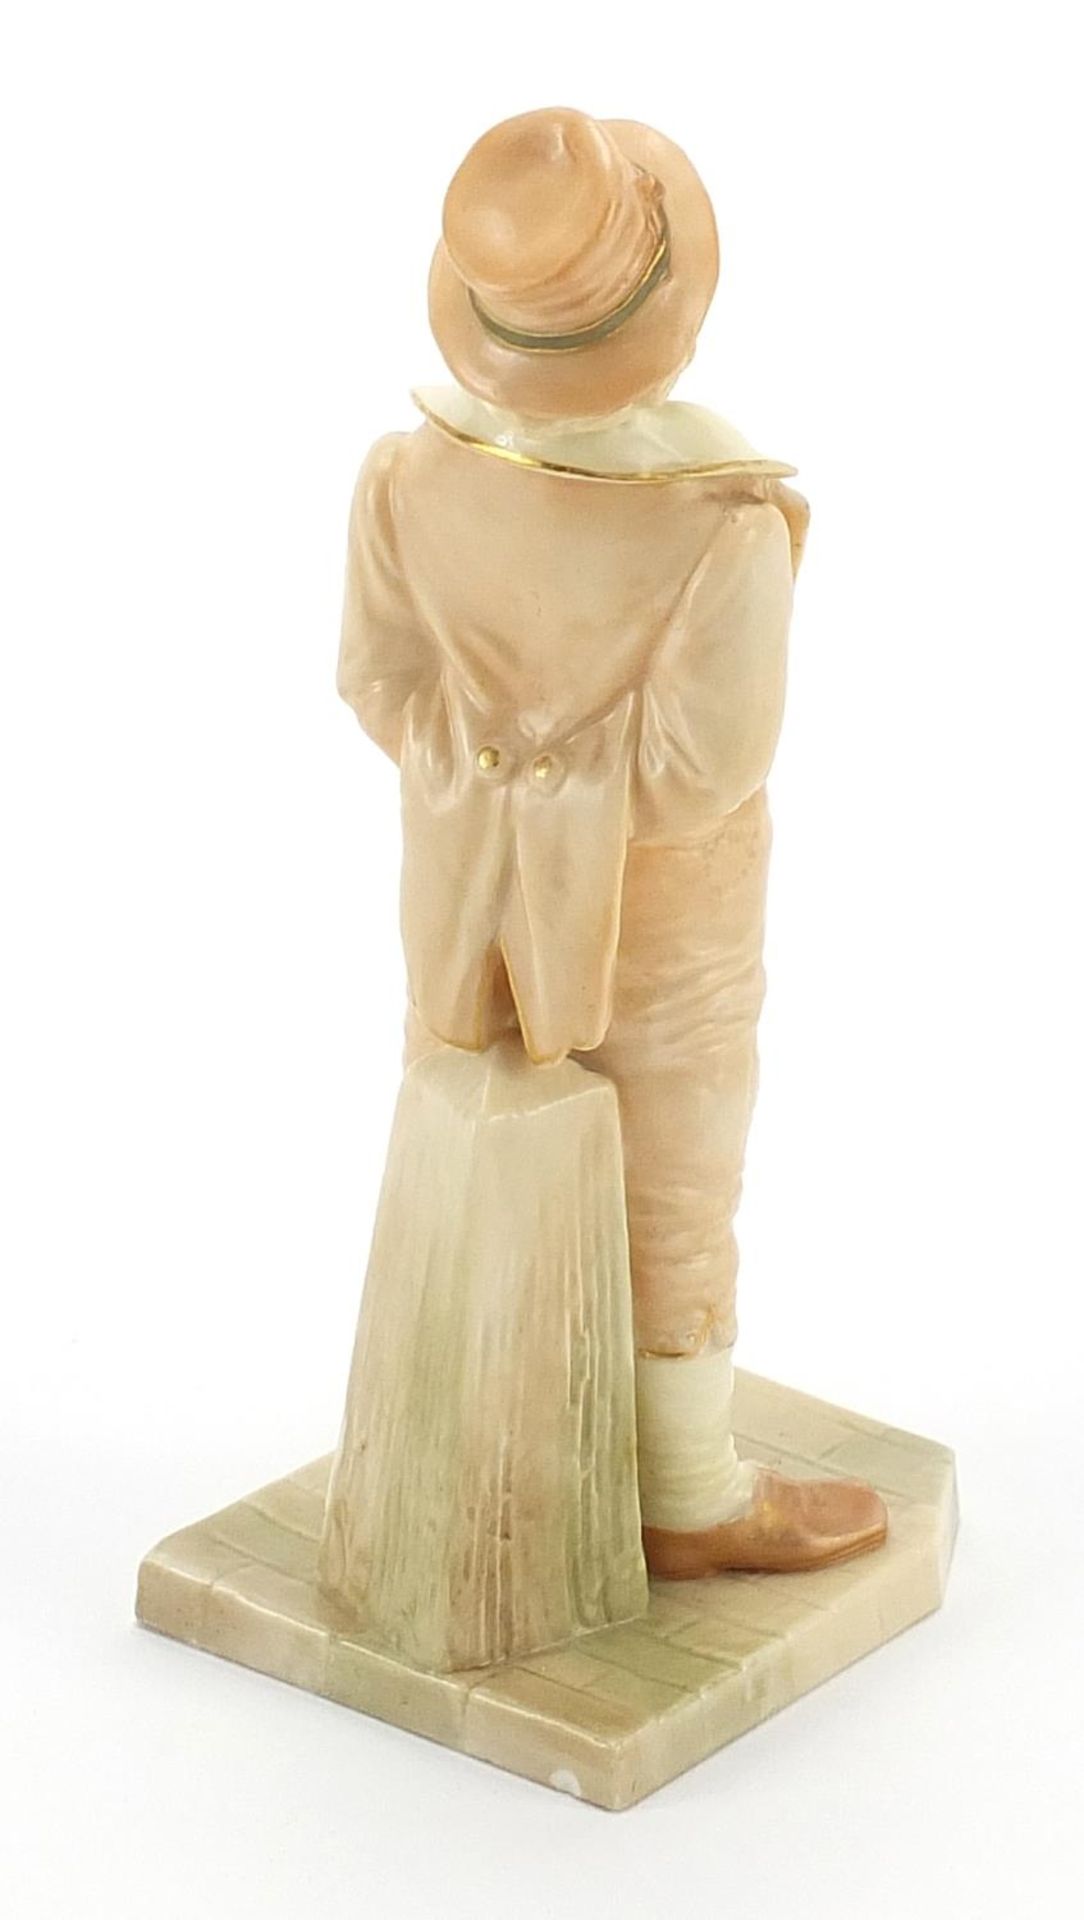 James Hadley for Royal Worcester blush ivory figure of The Irishman, 17.5cm high - Image 2 of 3